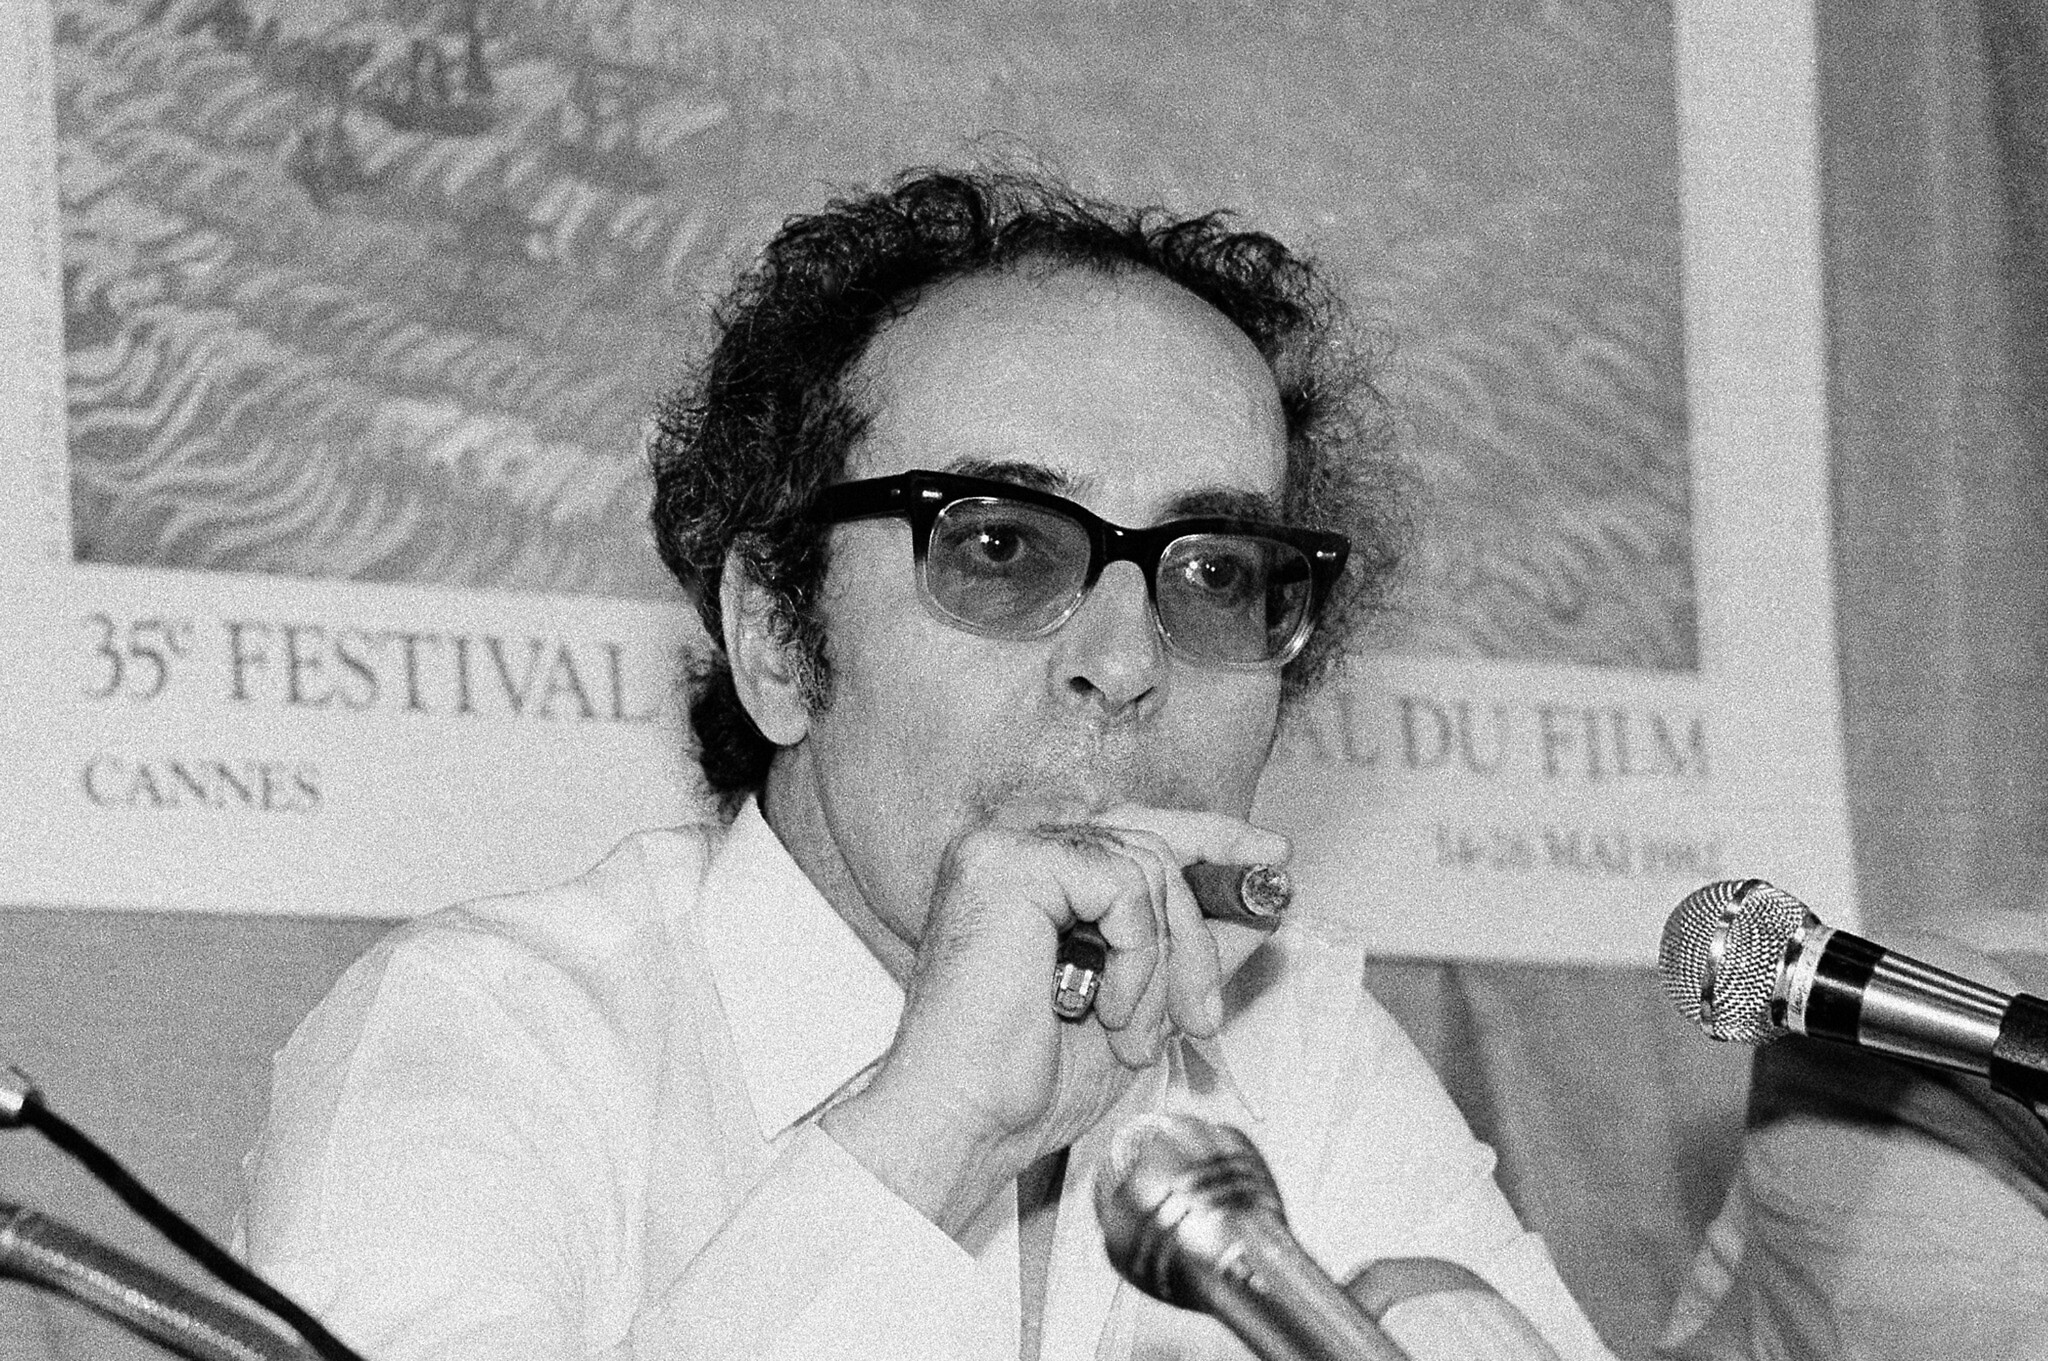 Iconic French director Jean-Luc Godard dies at 91: Reports